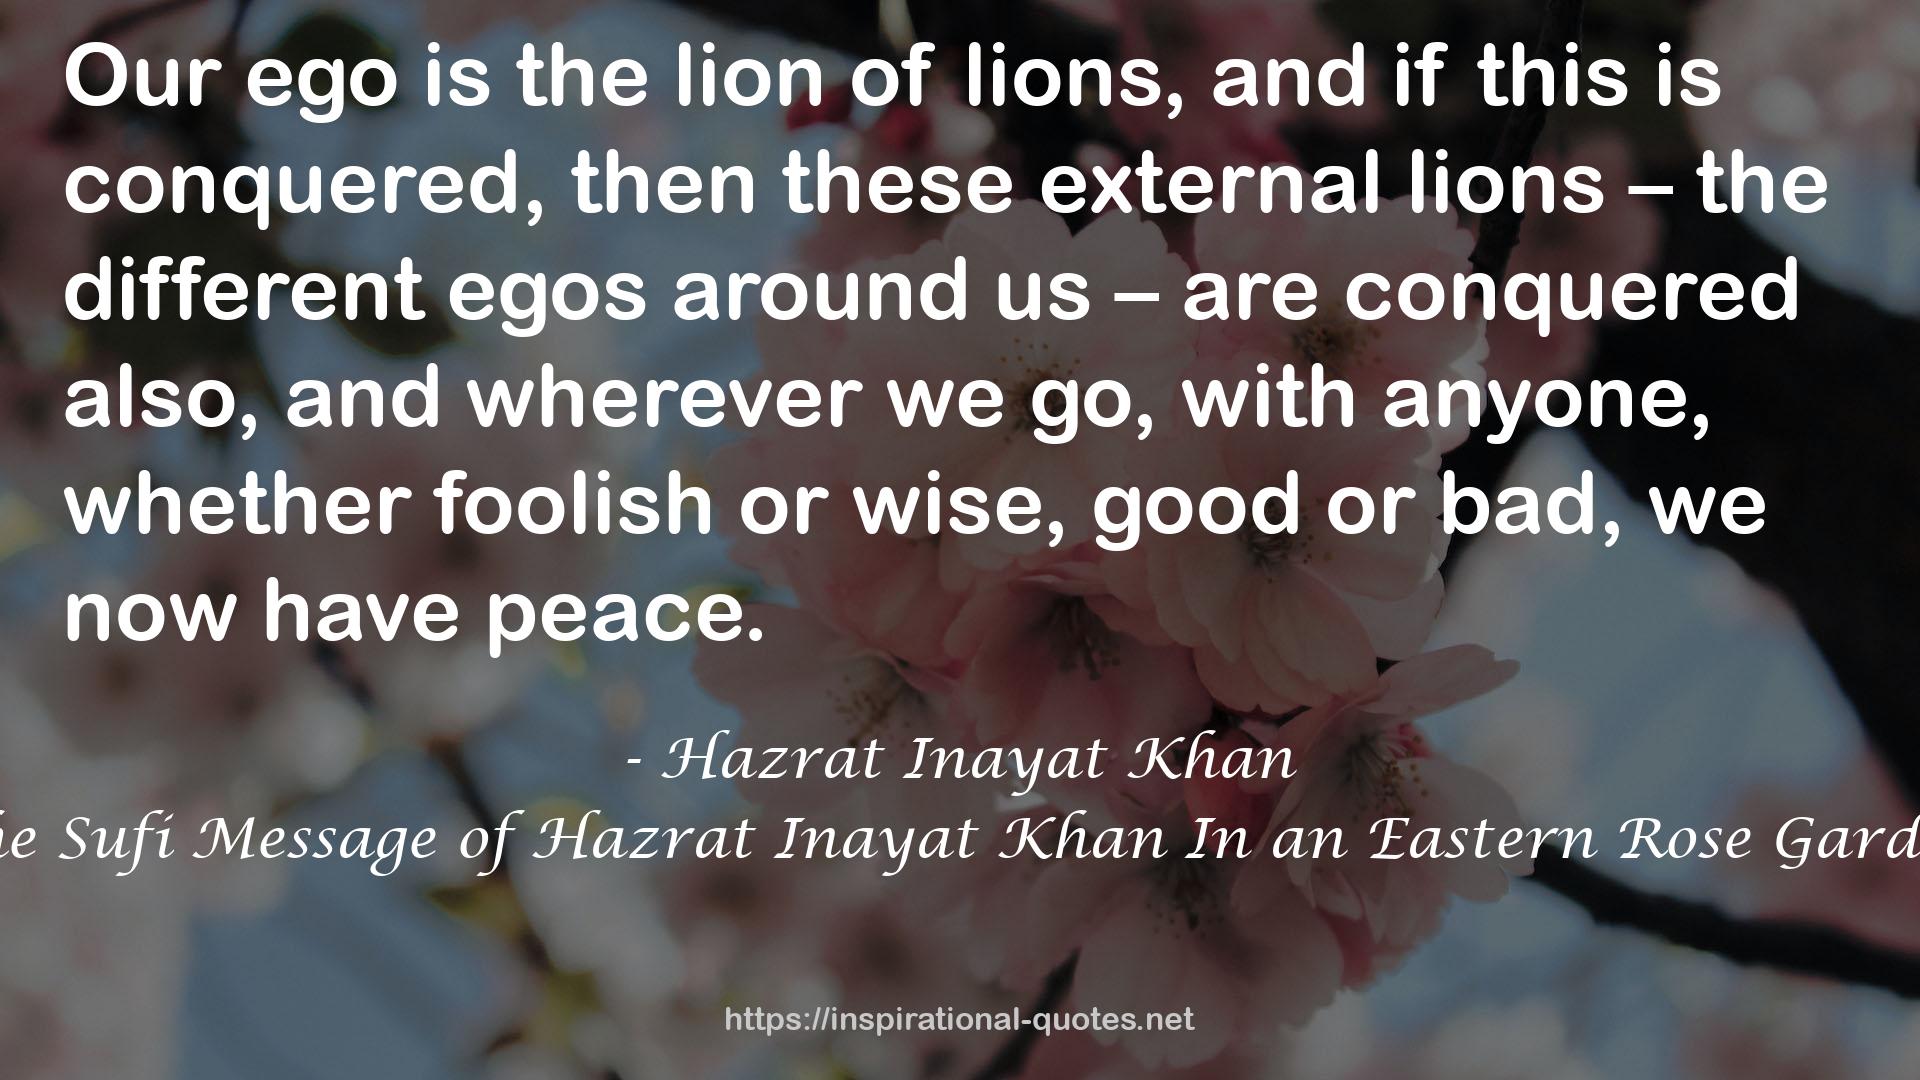 The Sufi Message of Hazrat Inayat Khan In an Eastern Rose Garden QUOTES